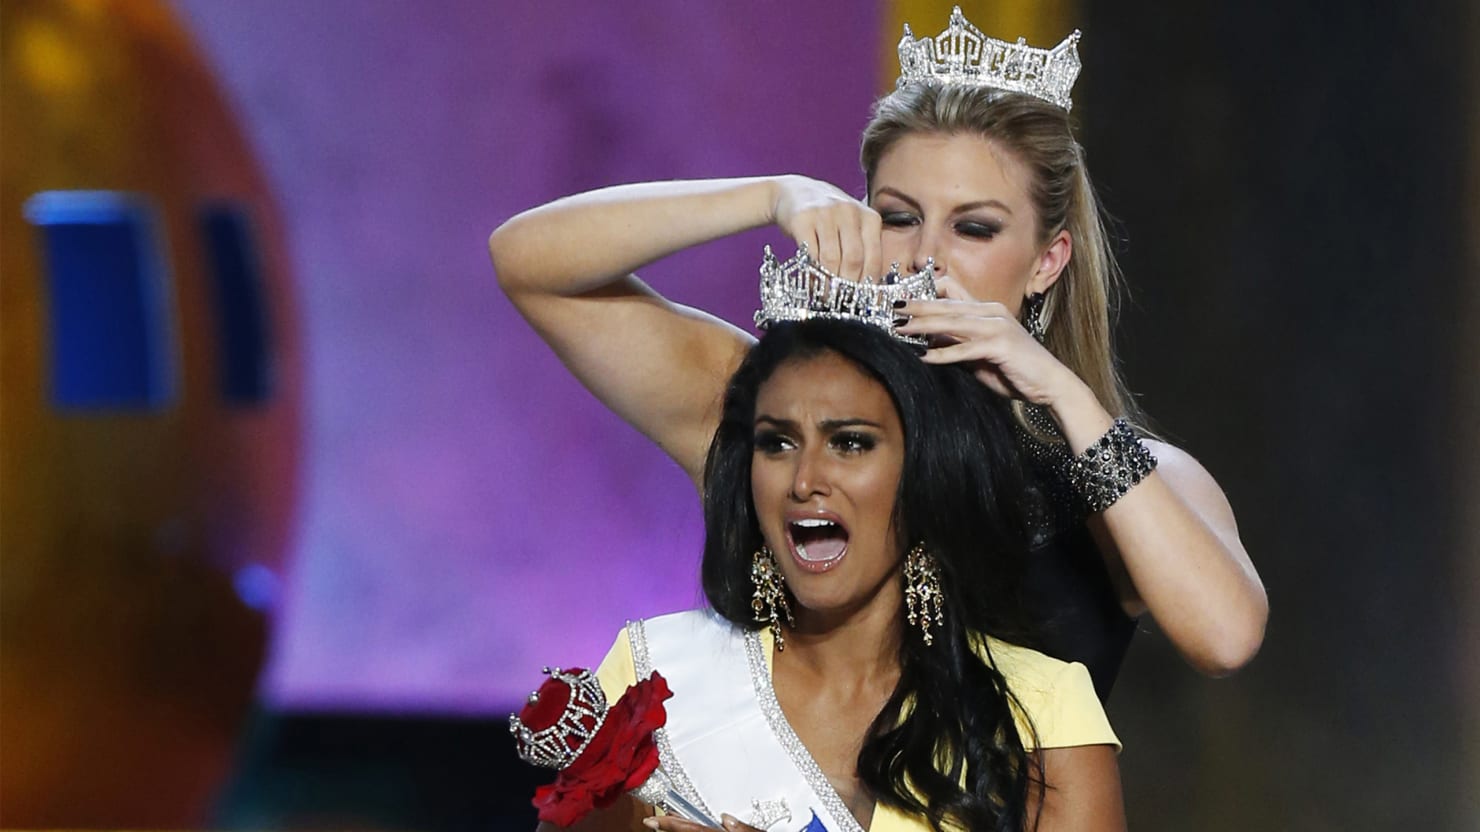 Nina Davuluri Crowned Miss America The First Miss America Of Indian Descent